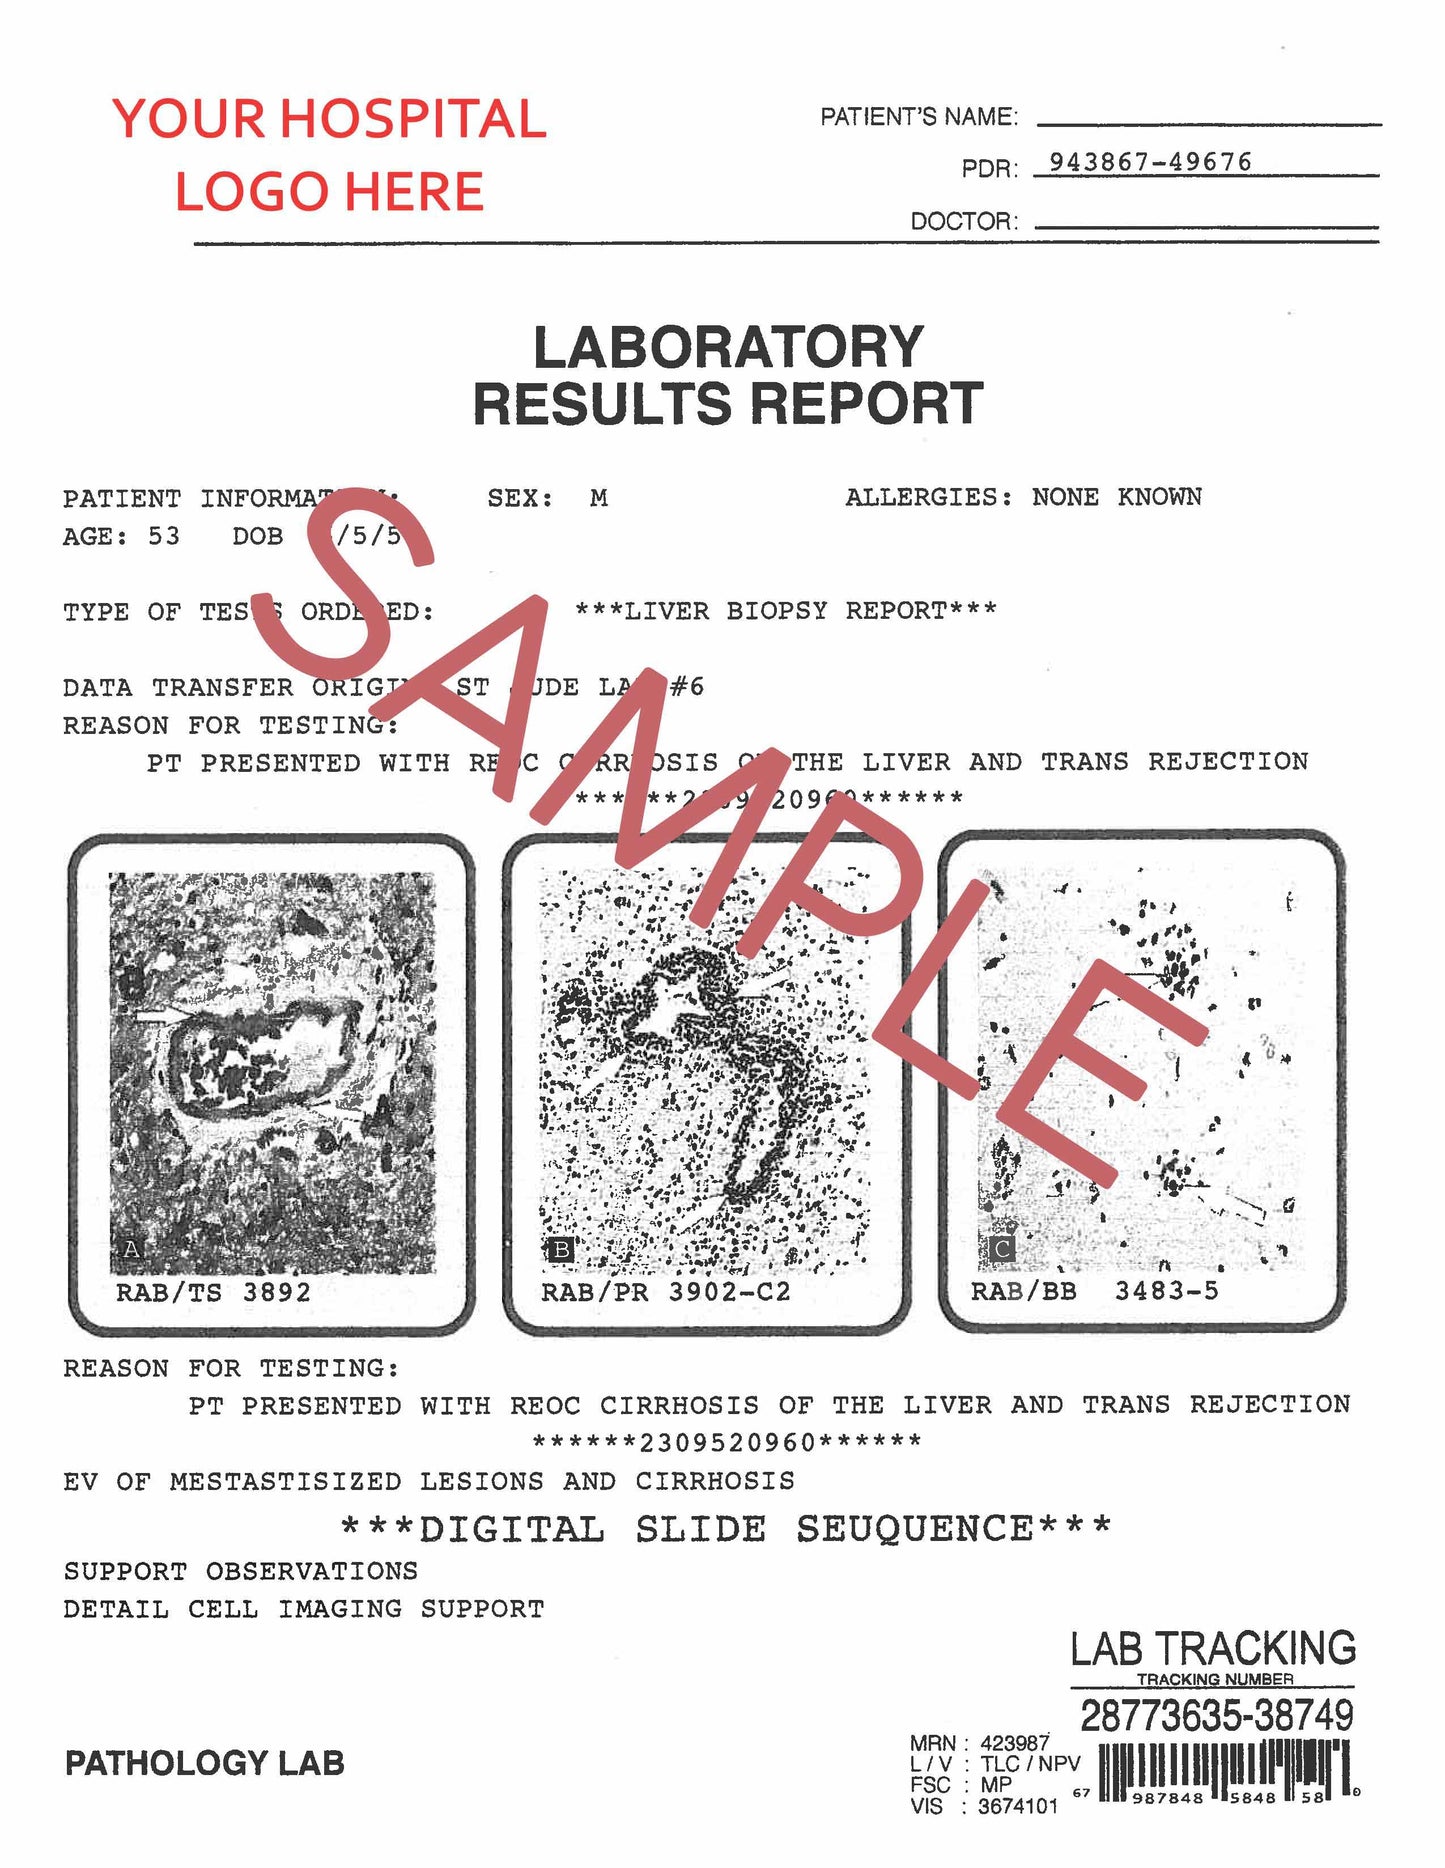 Laboratory Result Report (4 pages)